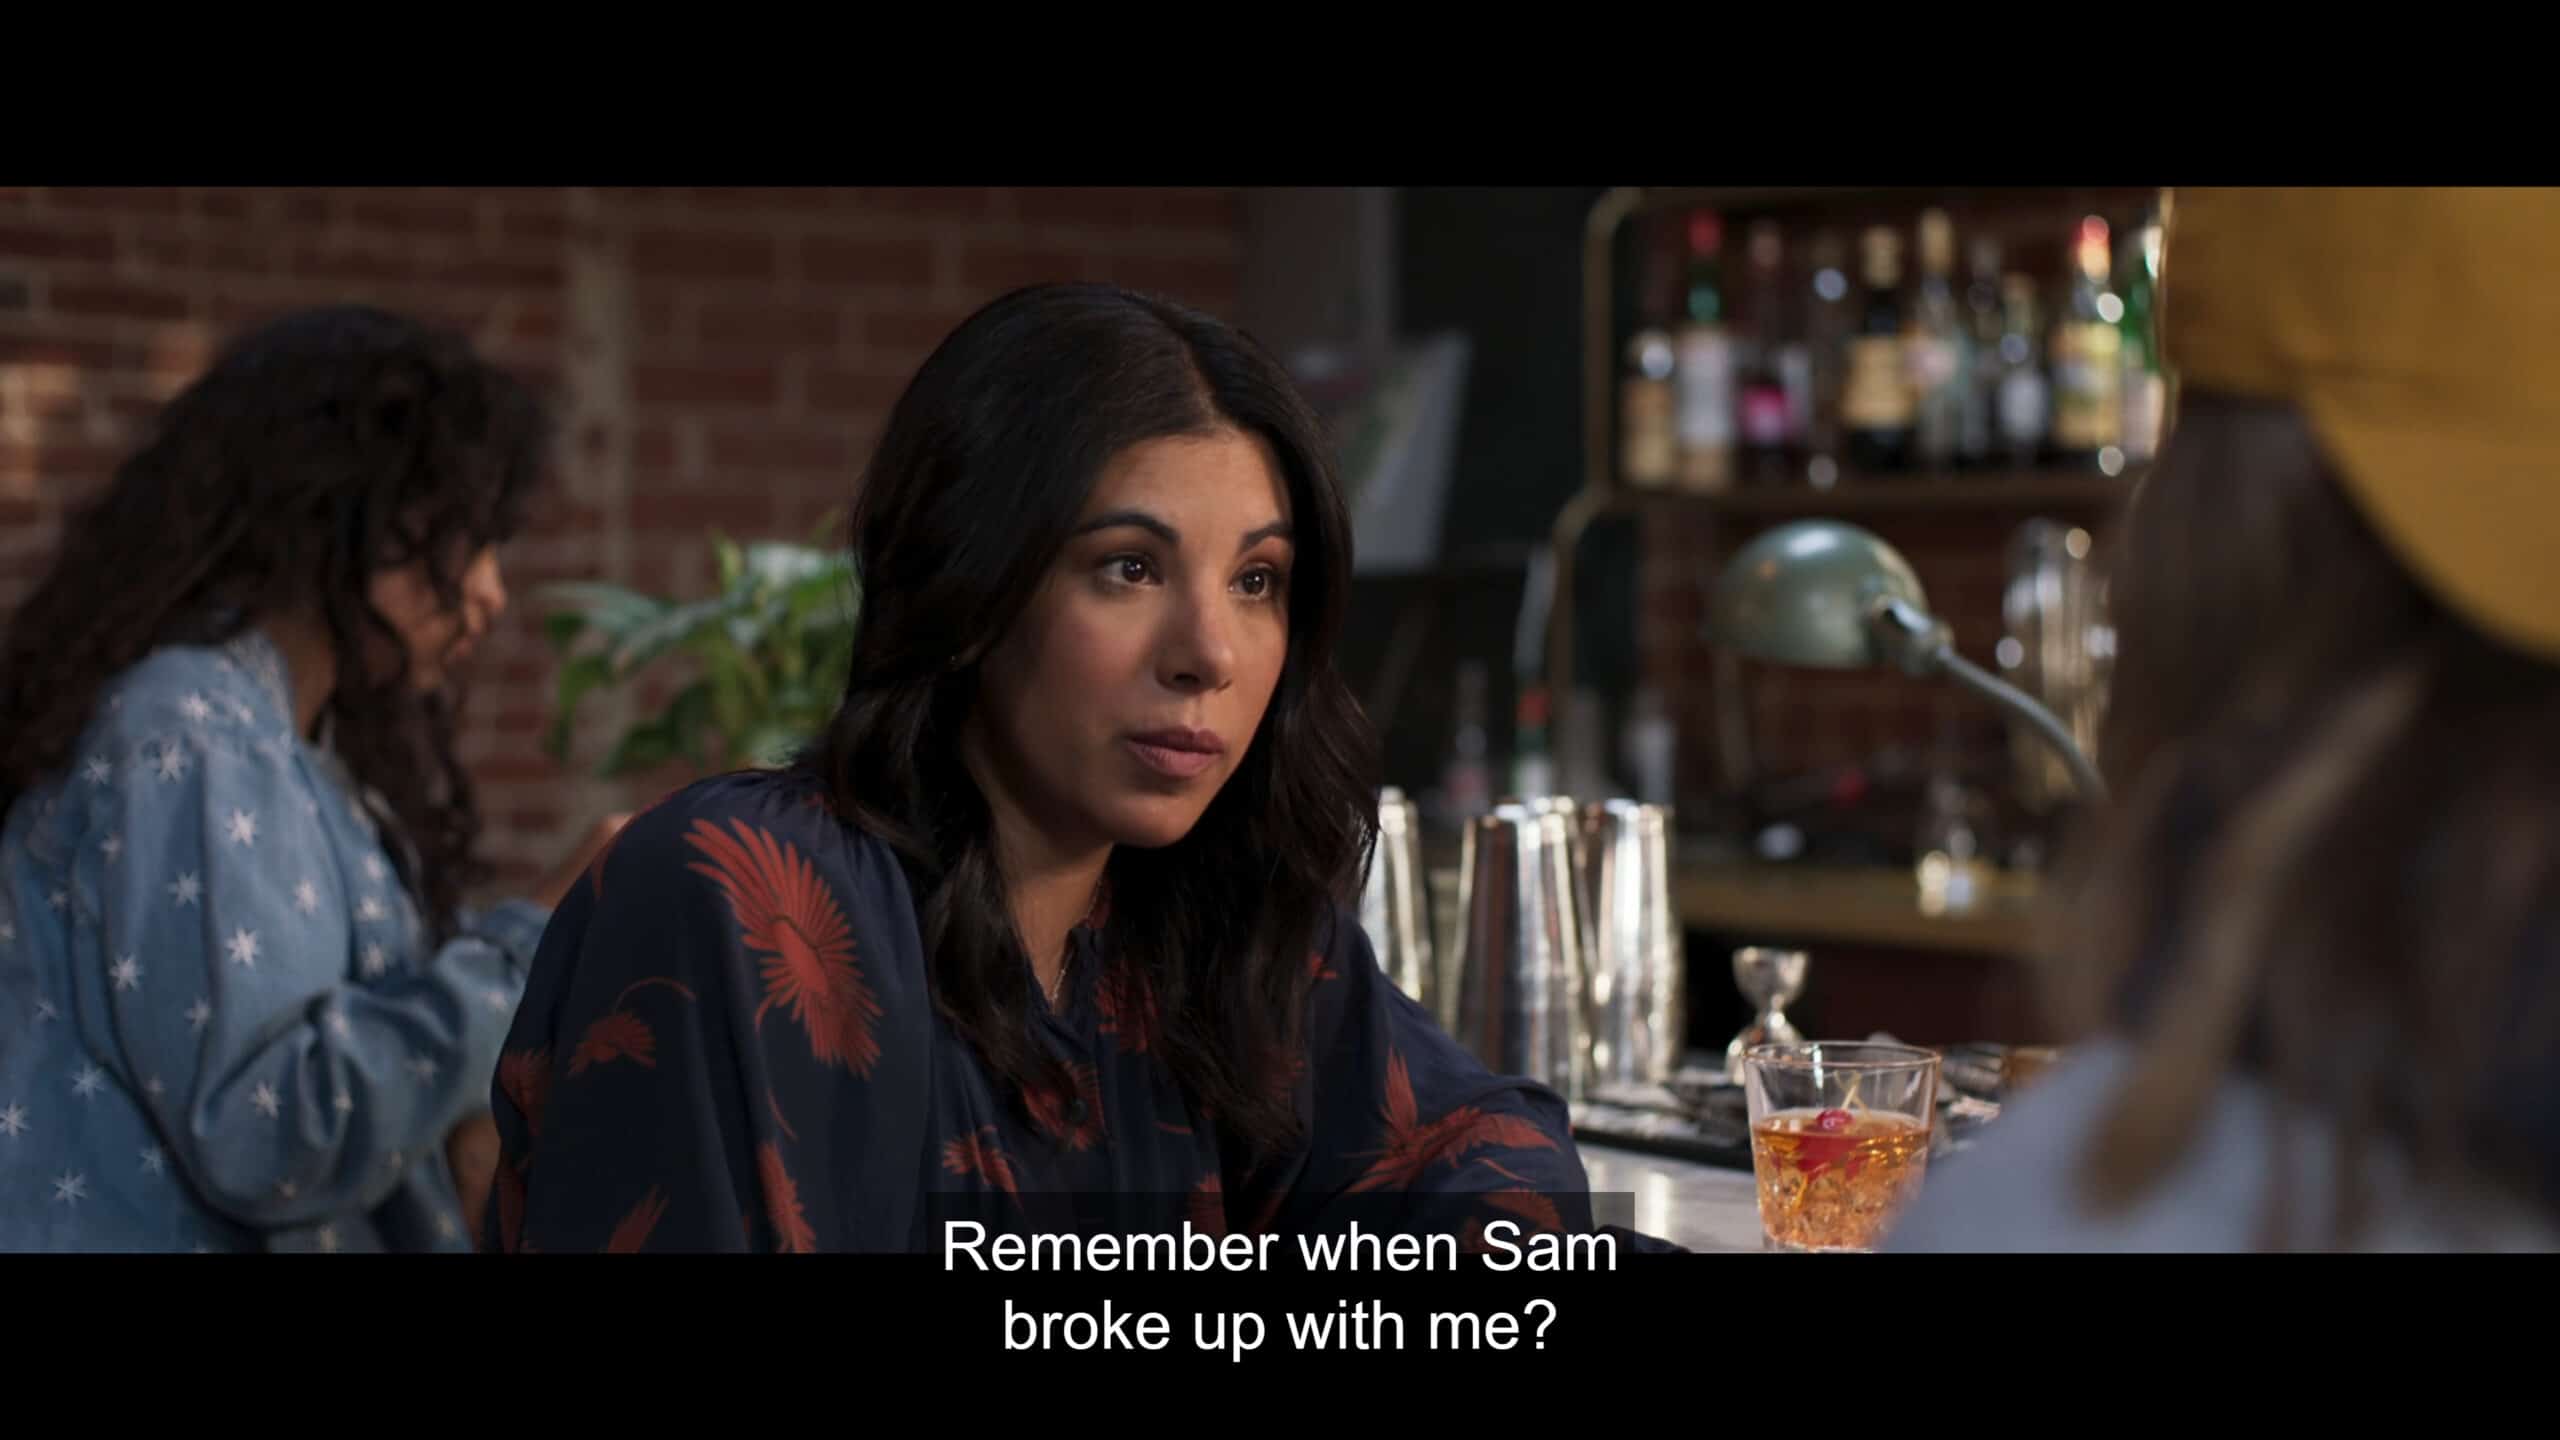 Chloe (Chrissie Fit) talking about her breakup with Sam